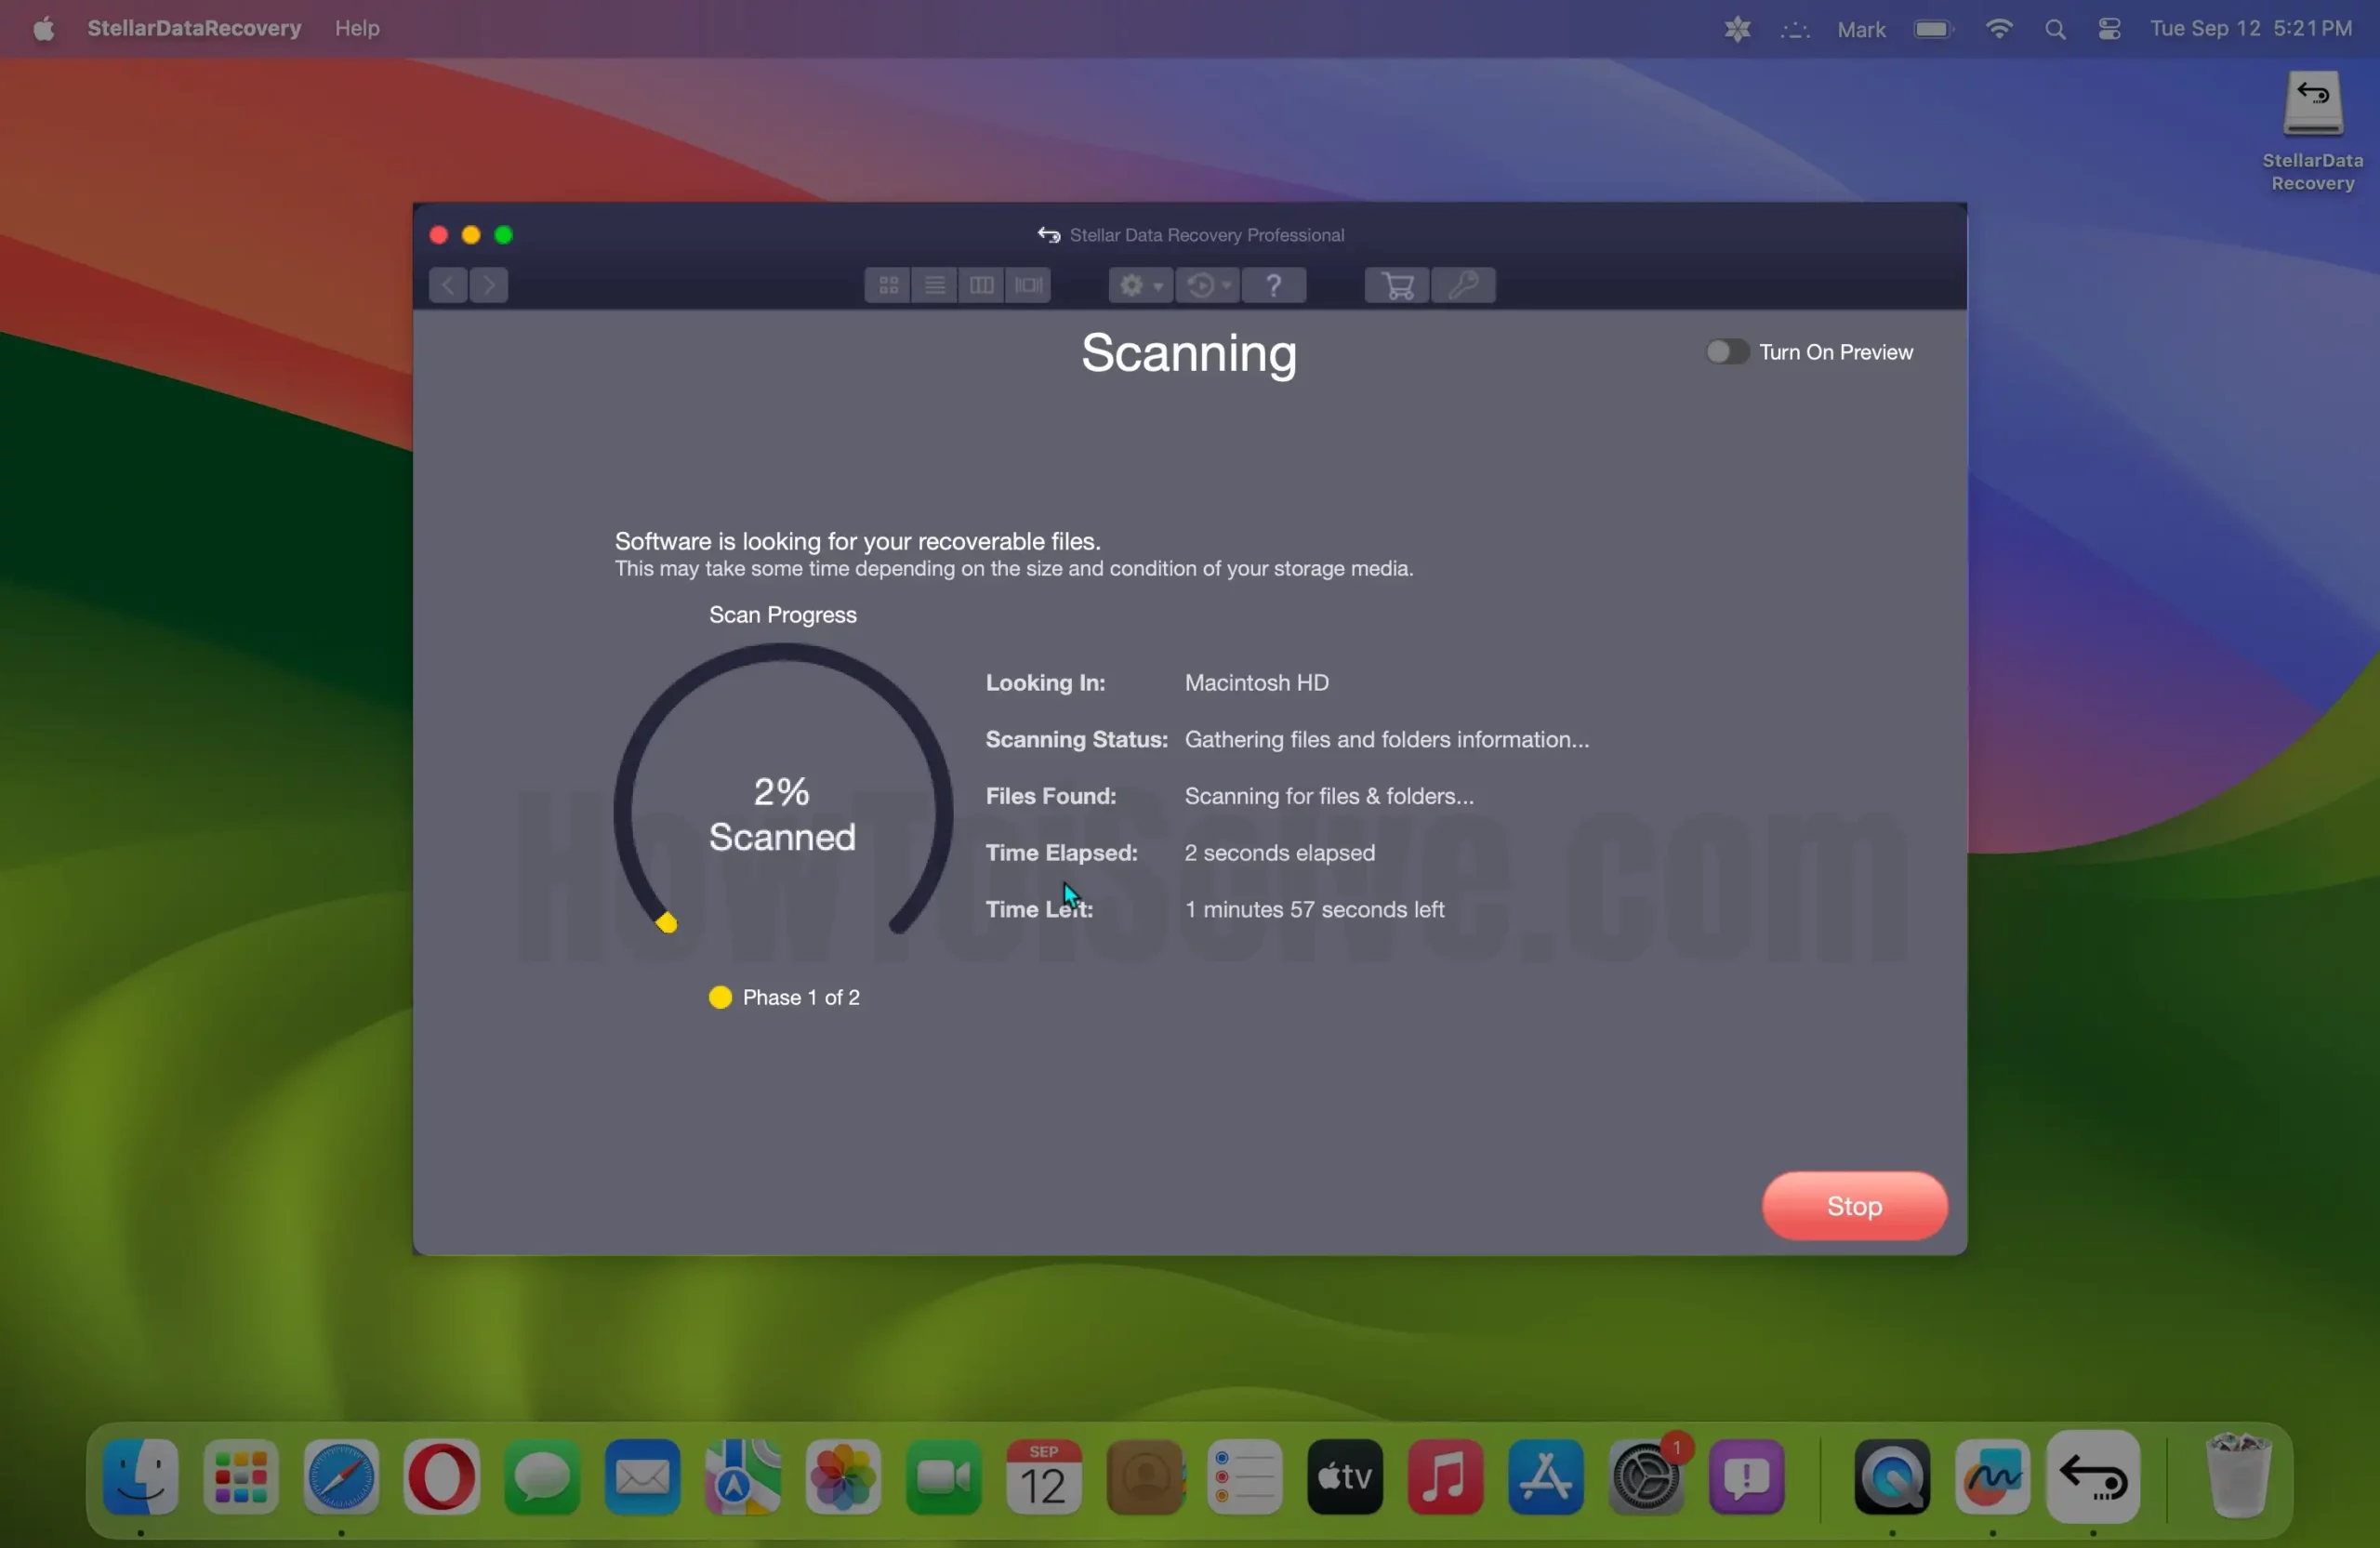 Open the scanning on mac